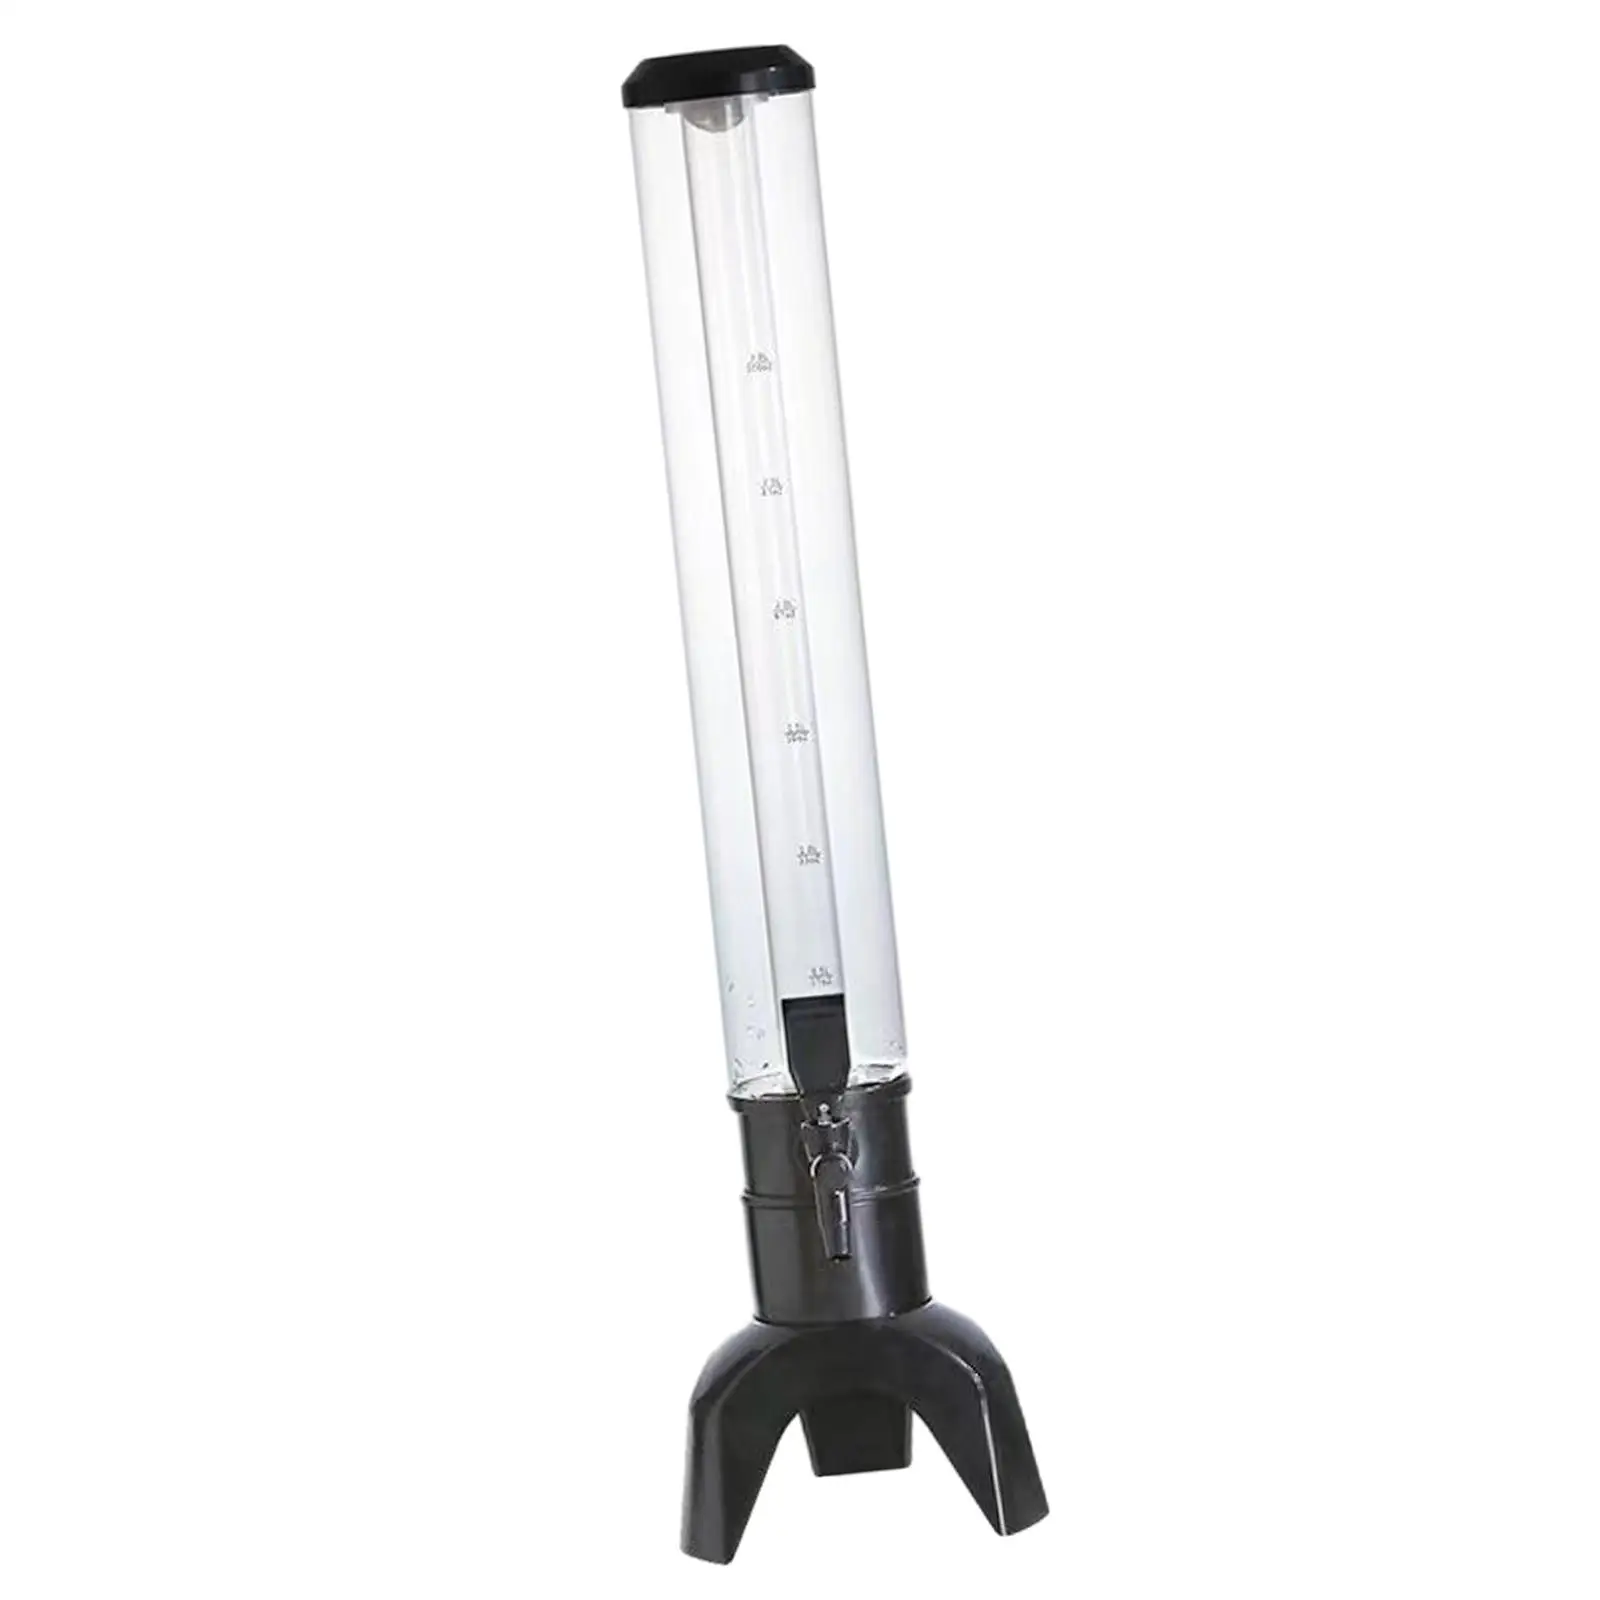 Beer Tower Dispenser Large Capacity 3L Beer Dispensers Clear Tower Dispenser for Holiday Parties Bars Cocktail Party